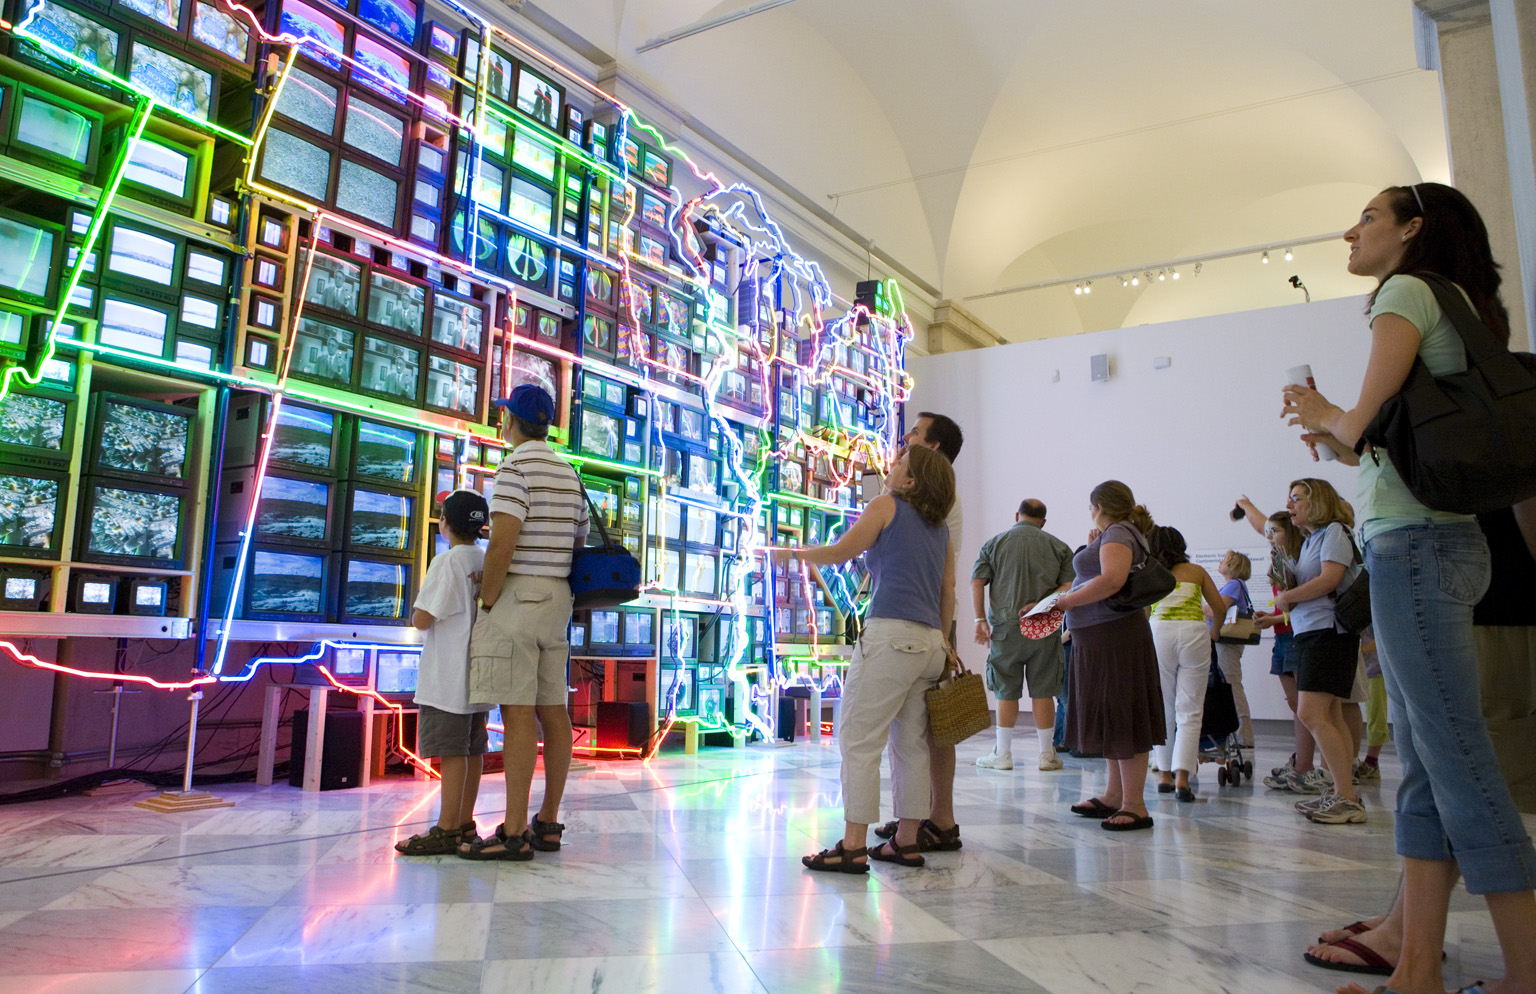 People look at a map of United States of a fifty-one channel video installation with neon outlines.